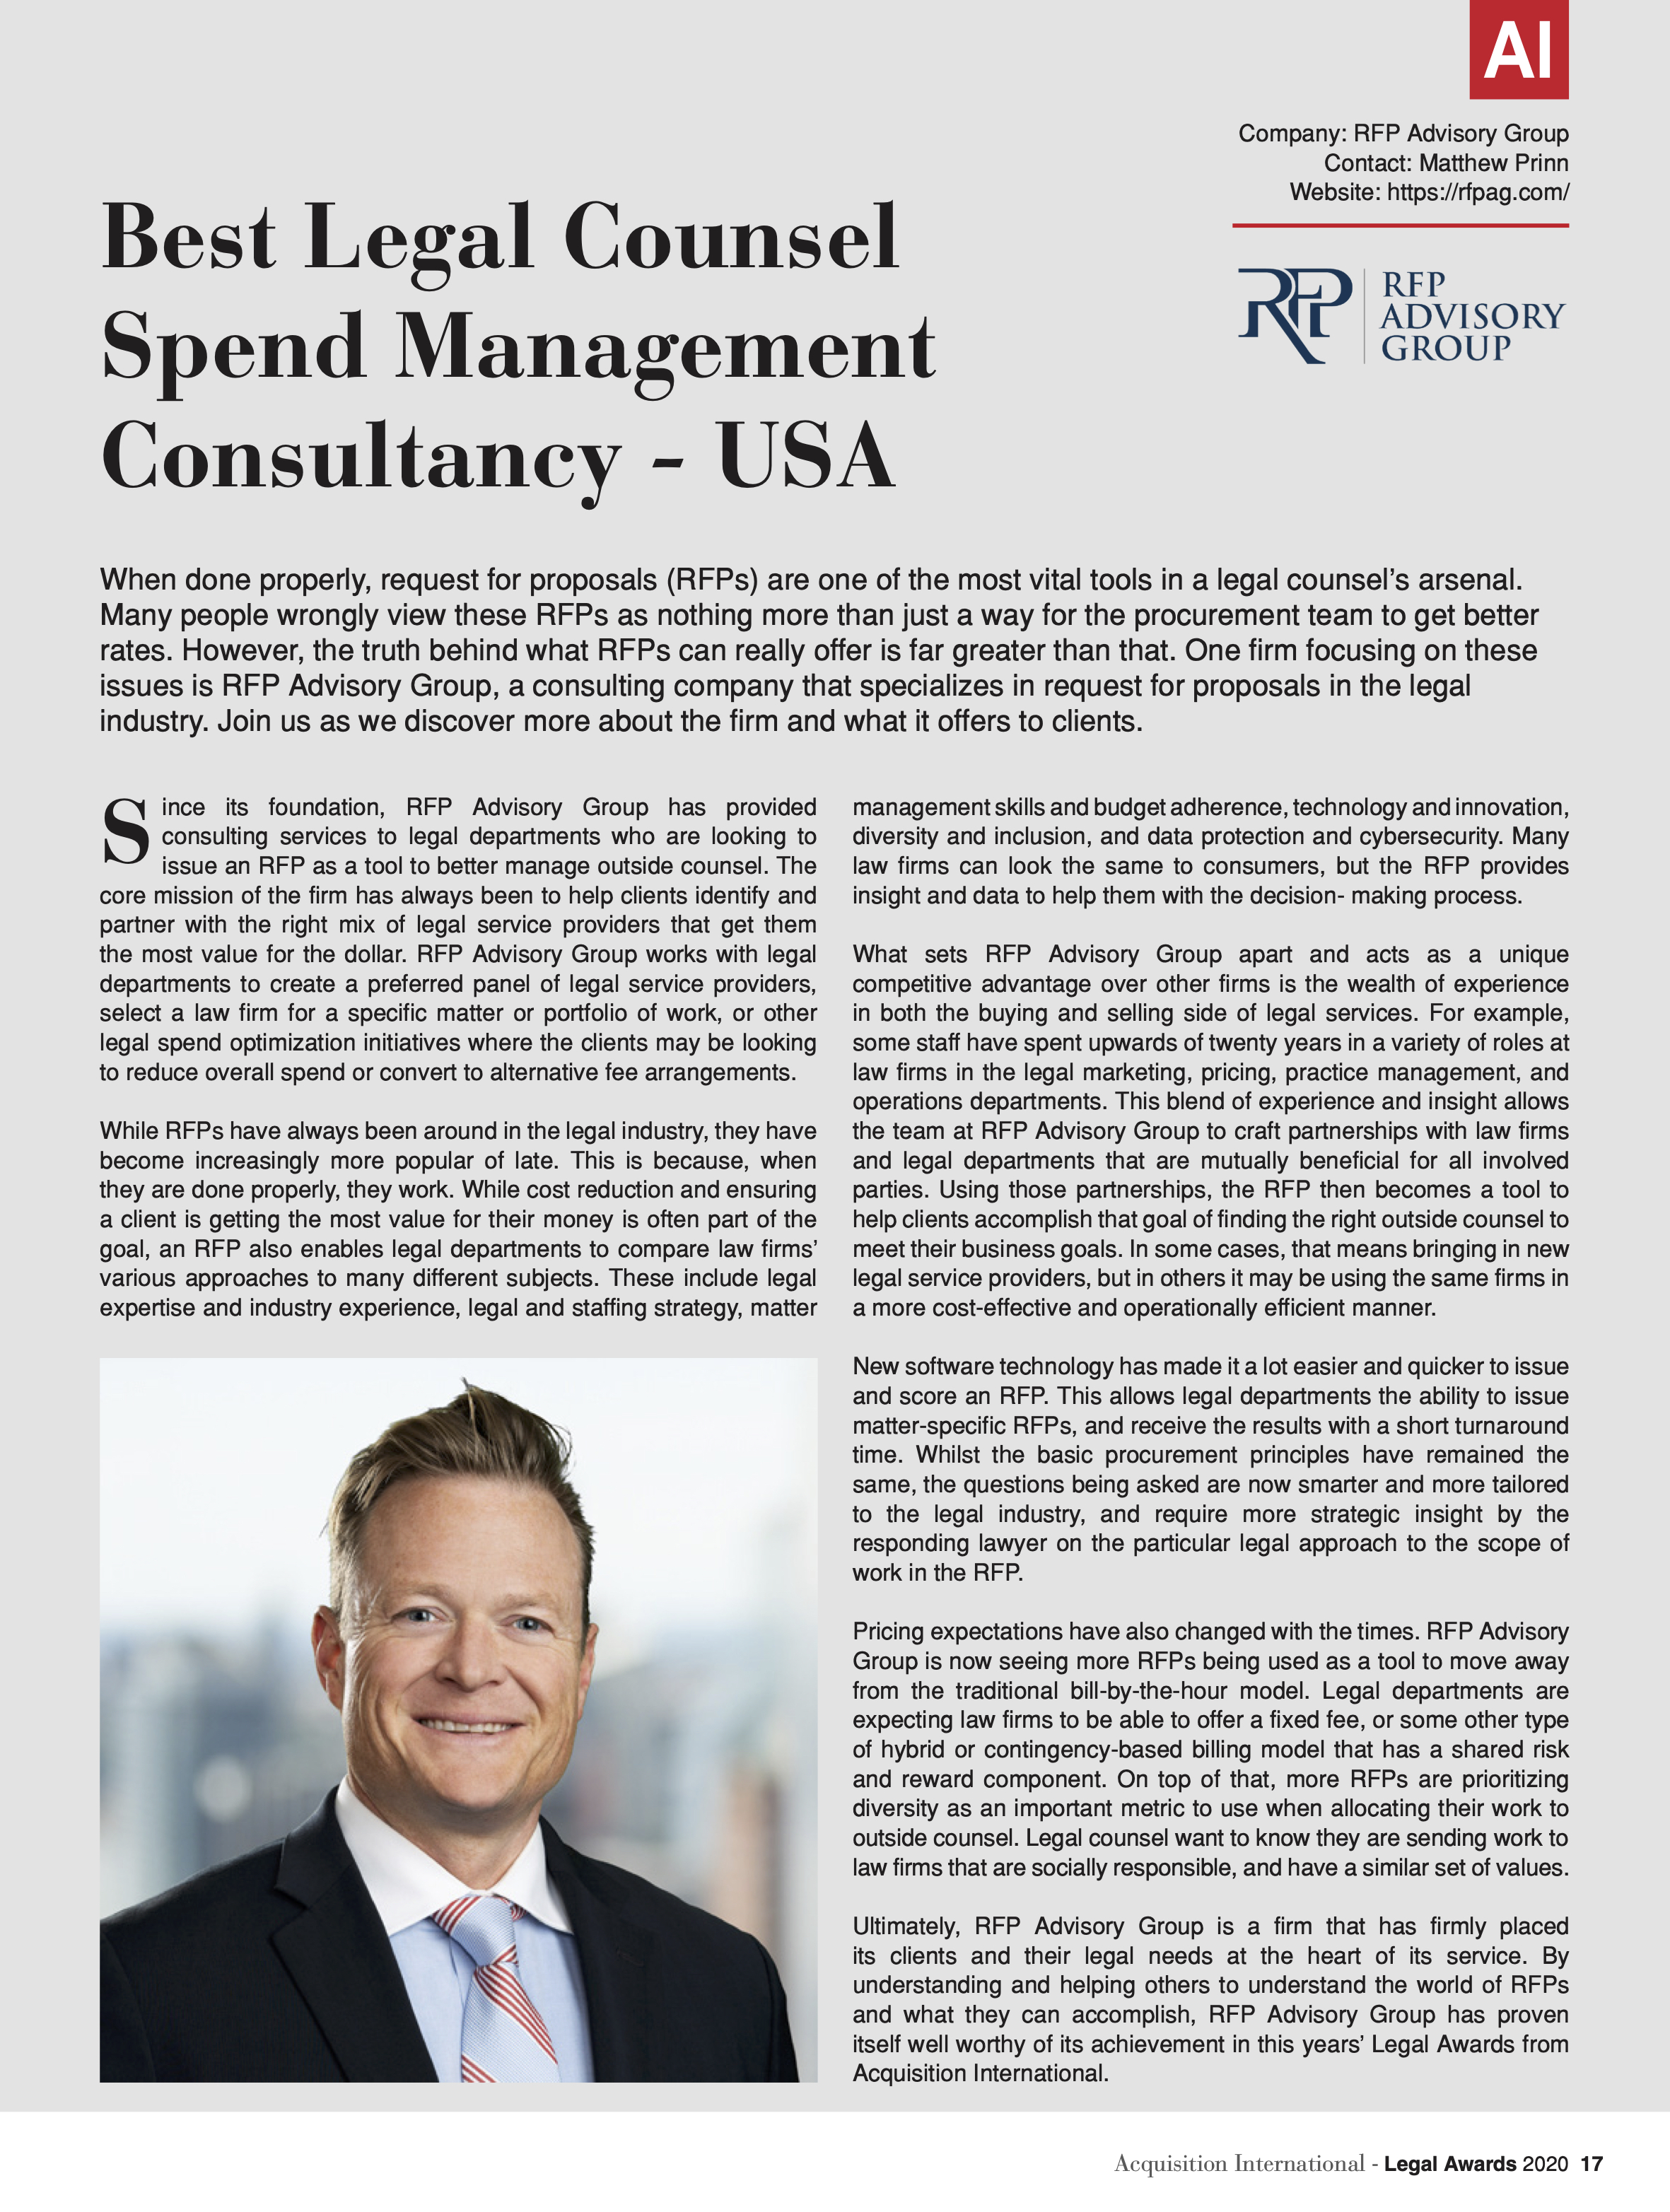 Matthew Prinn of RFP Advisory Group Has Been Named "Best Legal Counsel Spend Management Consultancy - USA" by AI Global Media